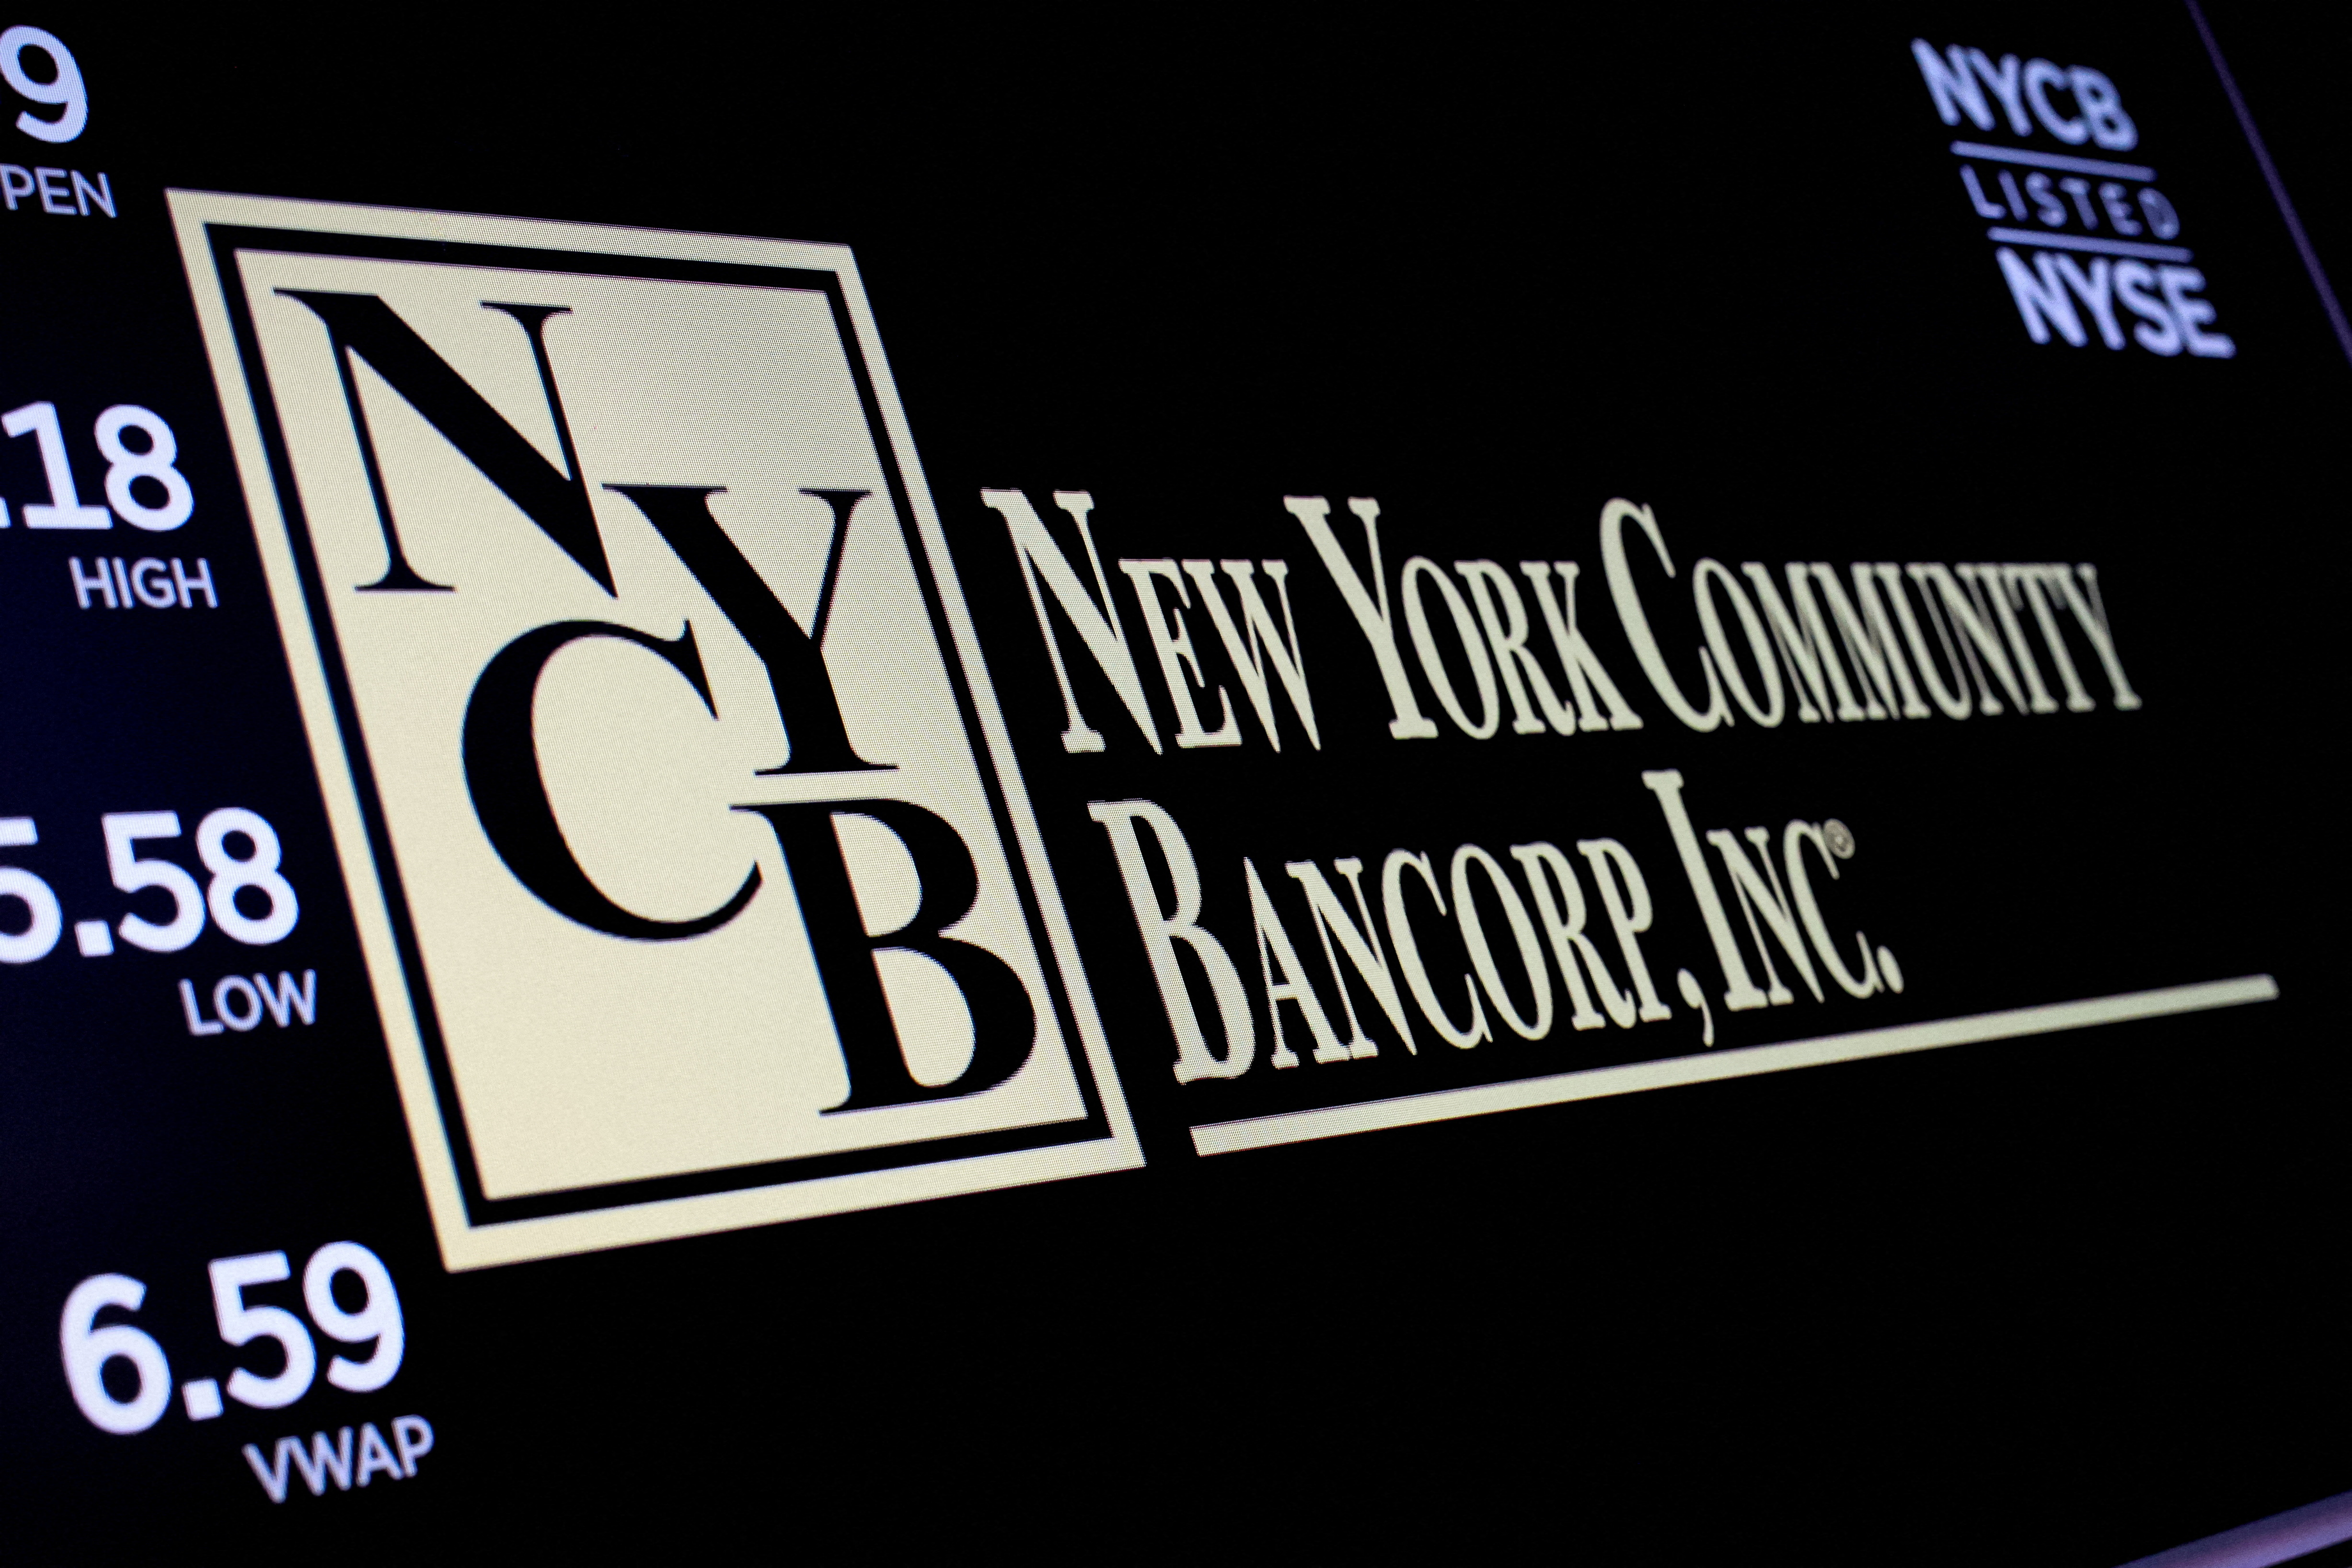 A screen displays the trading information for New York Community Bancorp on the the NYSE in New York